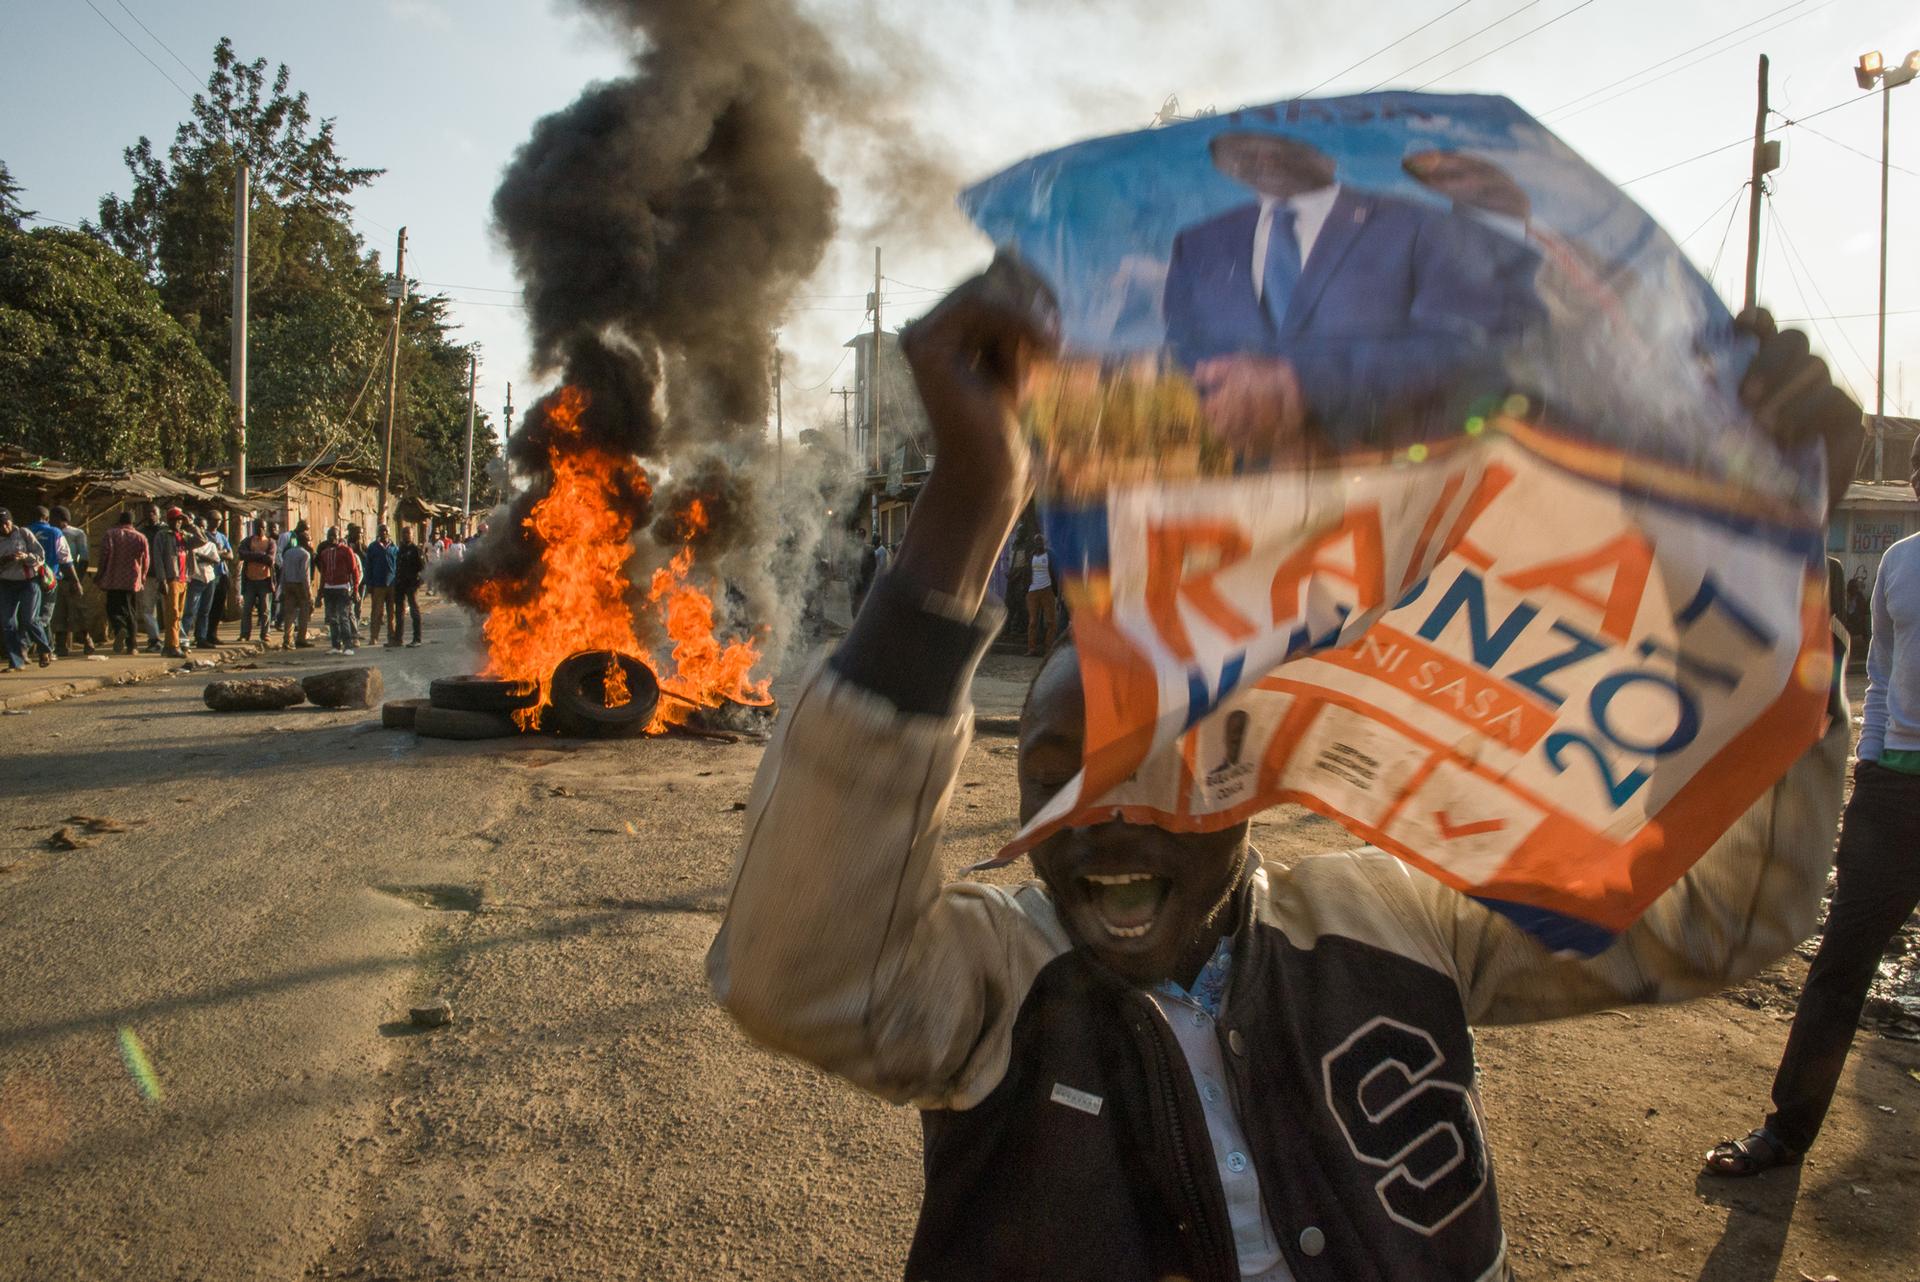 A man holds a campaign sign for presidential candidate Raila Odinga of the opposition party in the Kibera neighborhood of Nairobi, Kenya. Protesters were demanding that current President Uhuru Kenyatta concede to presidential candidate Raila Odinga of the